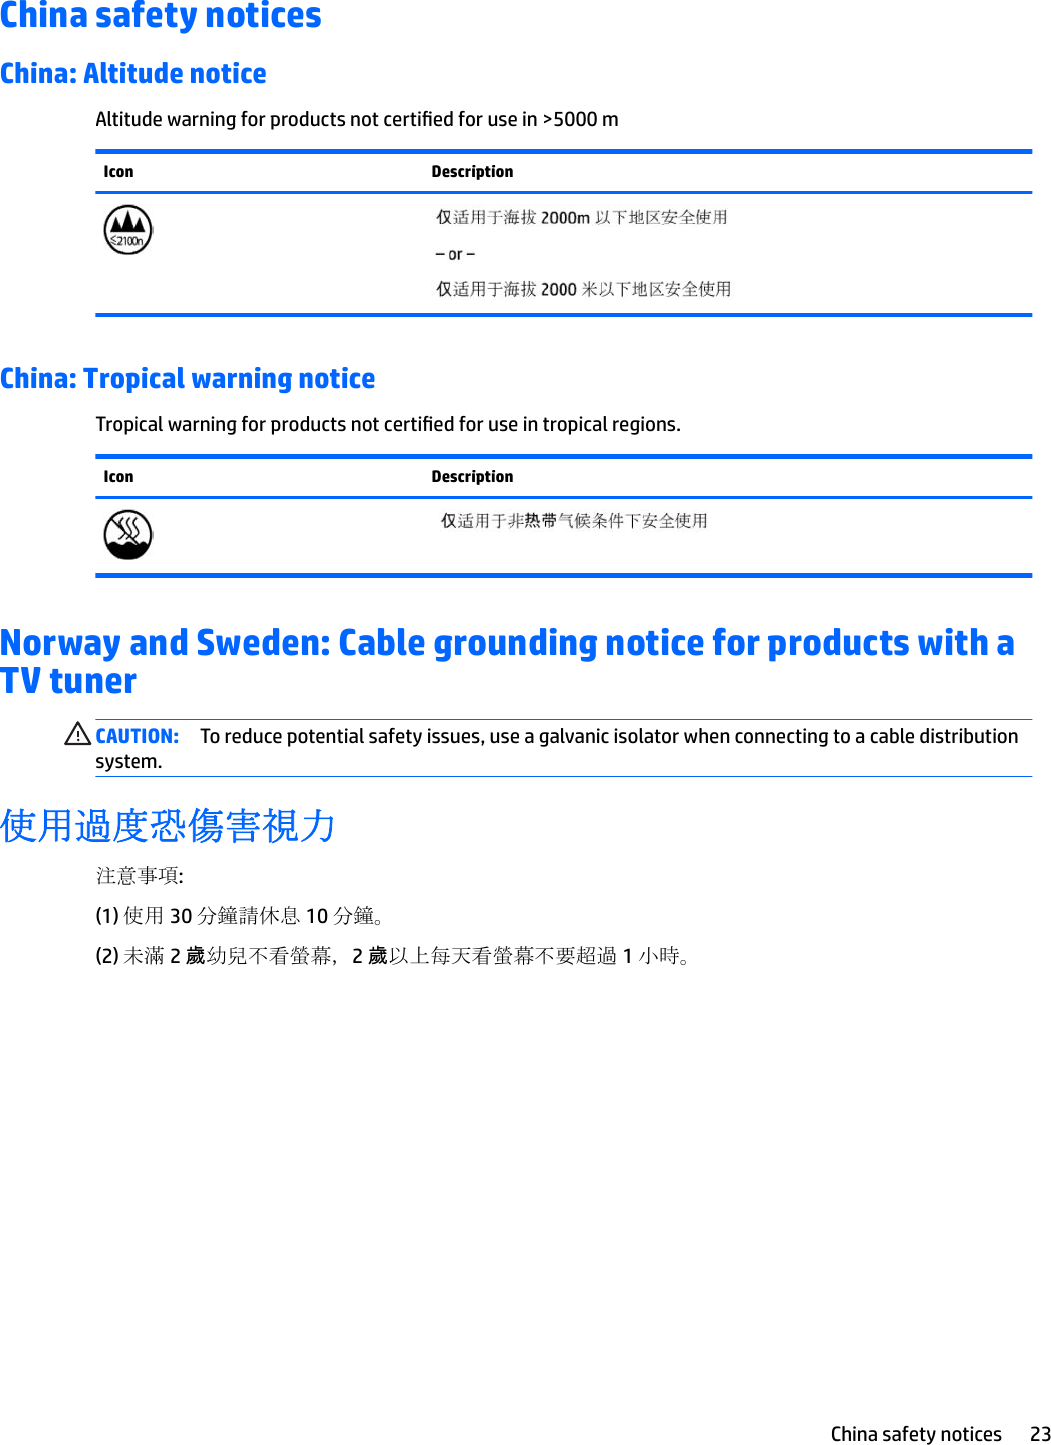 China safety noticesChina: Altitude noticeAltitude warning for products not certied for use in &gt;5000 mIcon DescriptionChina: Tropical warning noticeTropical warning for products not certied for use in tropical regions.Icon DescriptionNorway and Sweden: Cable grounding notice for products with a TV tunerCAUTION: To reduce potential safety issues, use a galvanic isolator when connecting to a cable distribution system.使用過度恐傷害視力注意事項:(1) 使用 30 分鐘請休息 10 分鐘。(2) 未滿 2 歲幼兒不看螢幕，2 歲以上每天看螢幕不要超過 1 小時。China safety notices 23